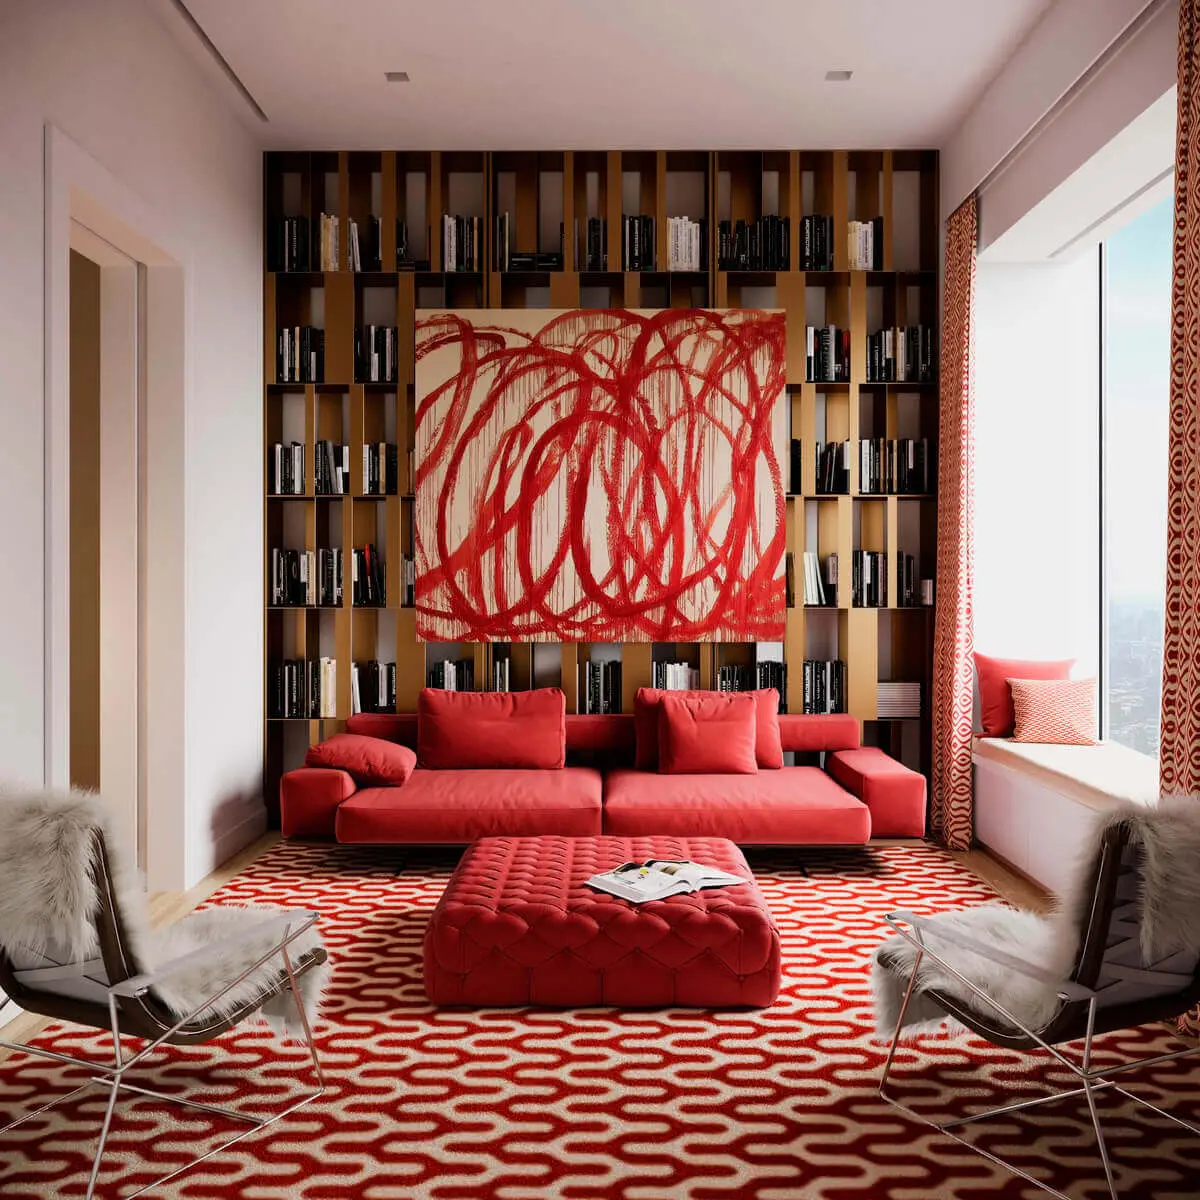 How The Colour Red In Interior Design Can Make You Feel